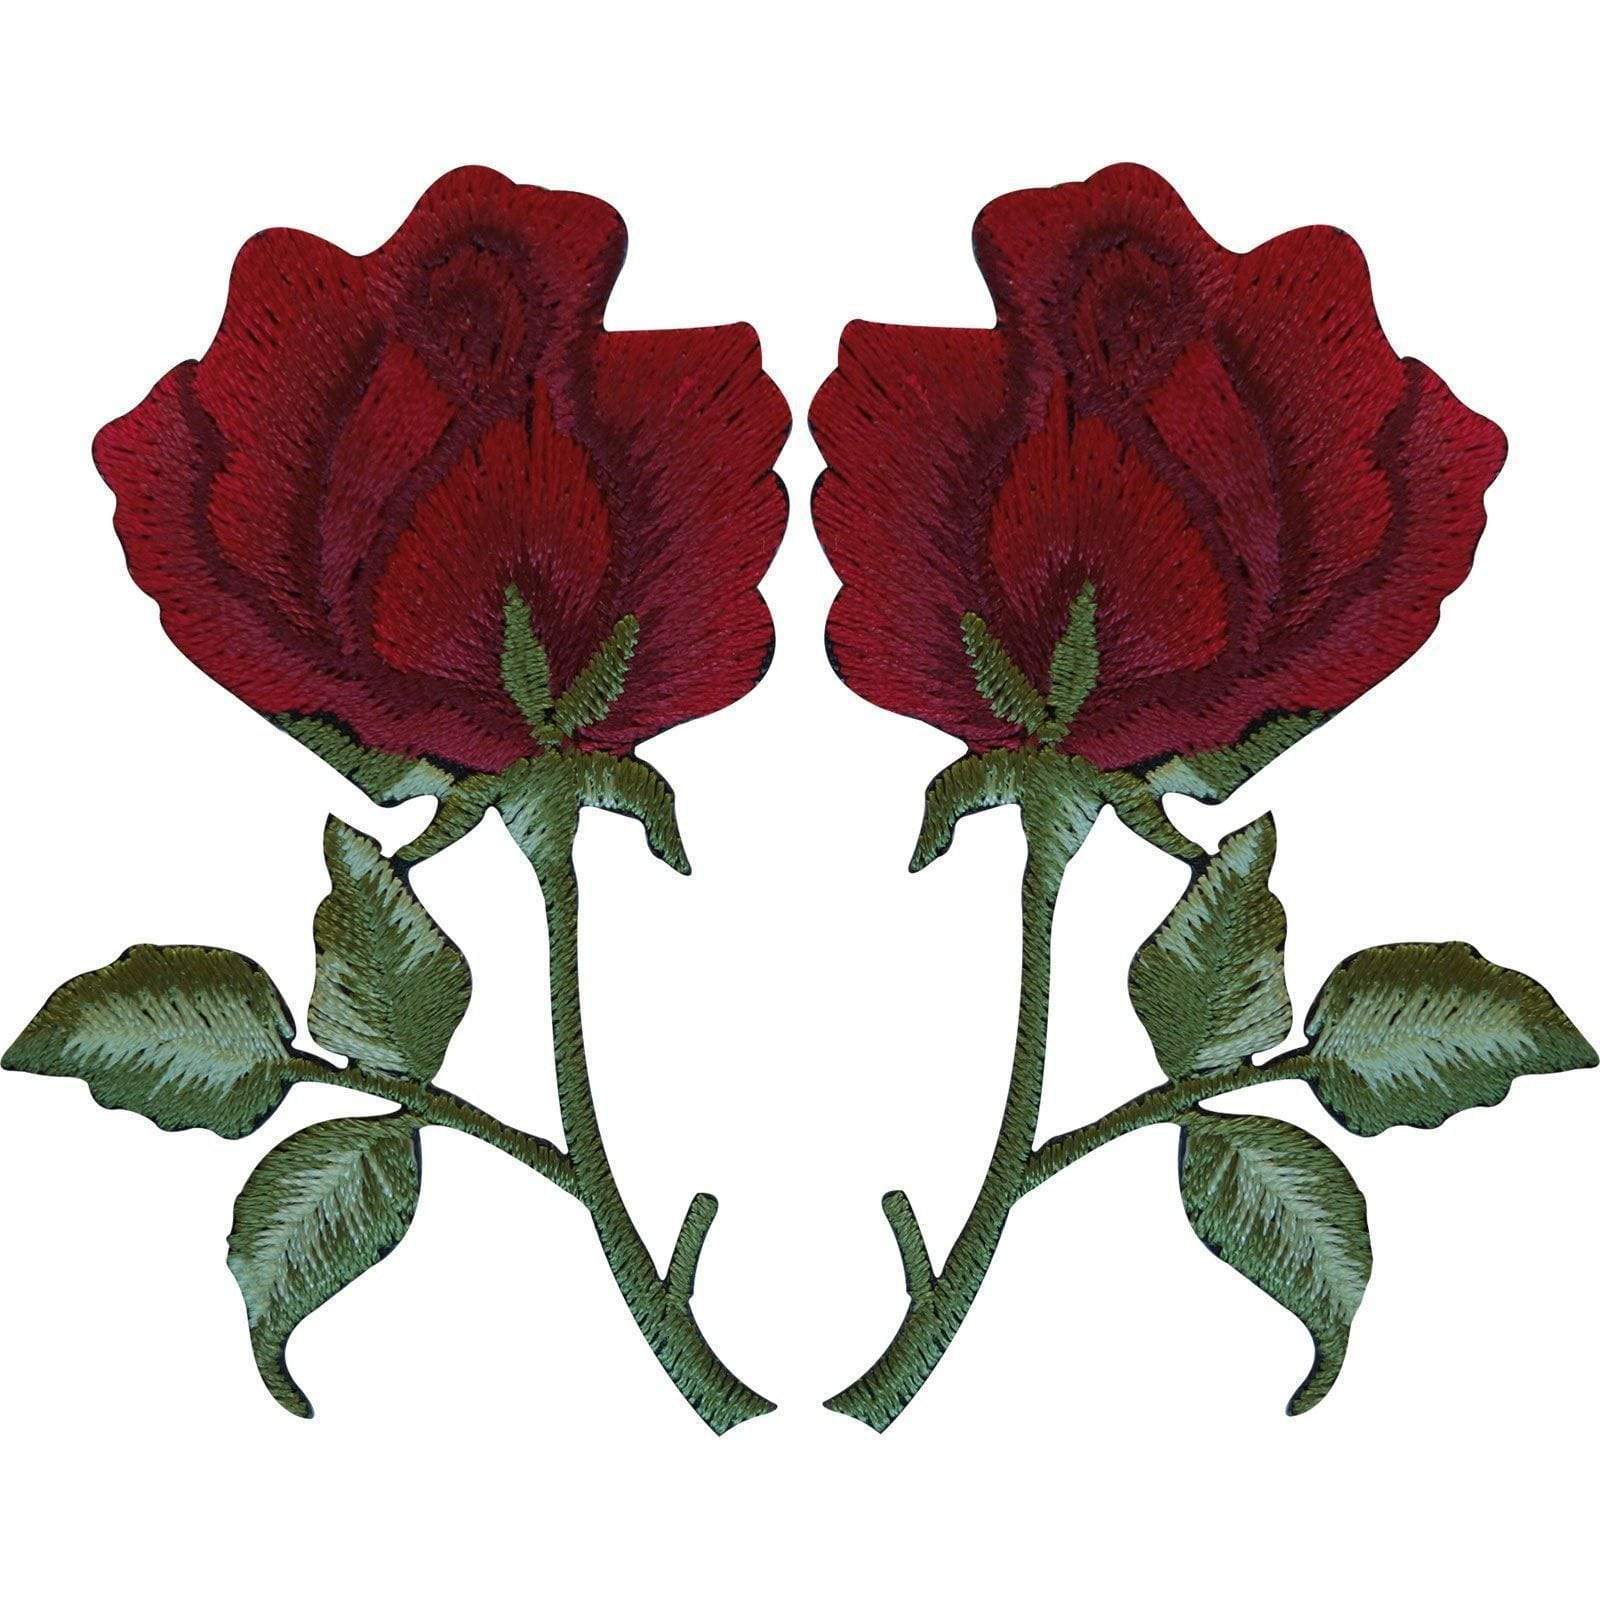 Pair of Red Roses Patches Iron On / Sew On Embroidered Rose Flower Patch Badge